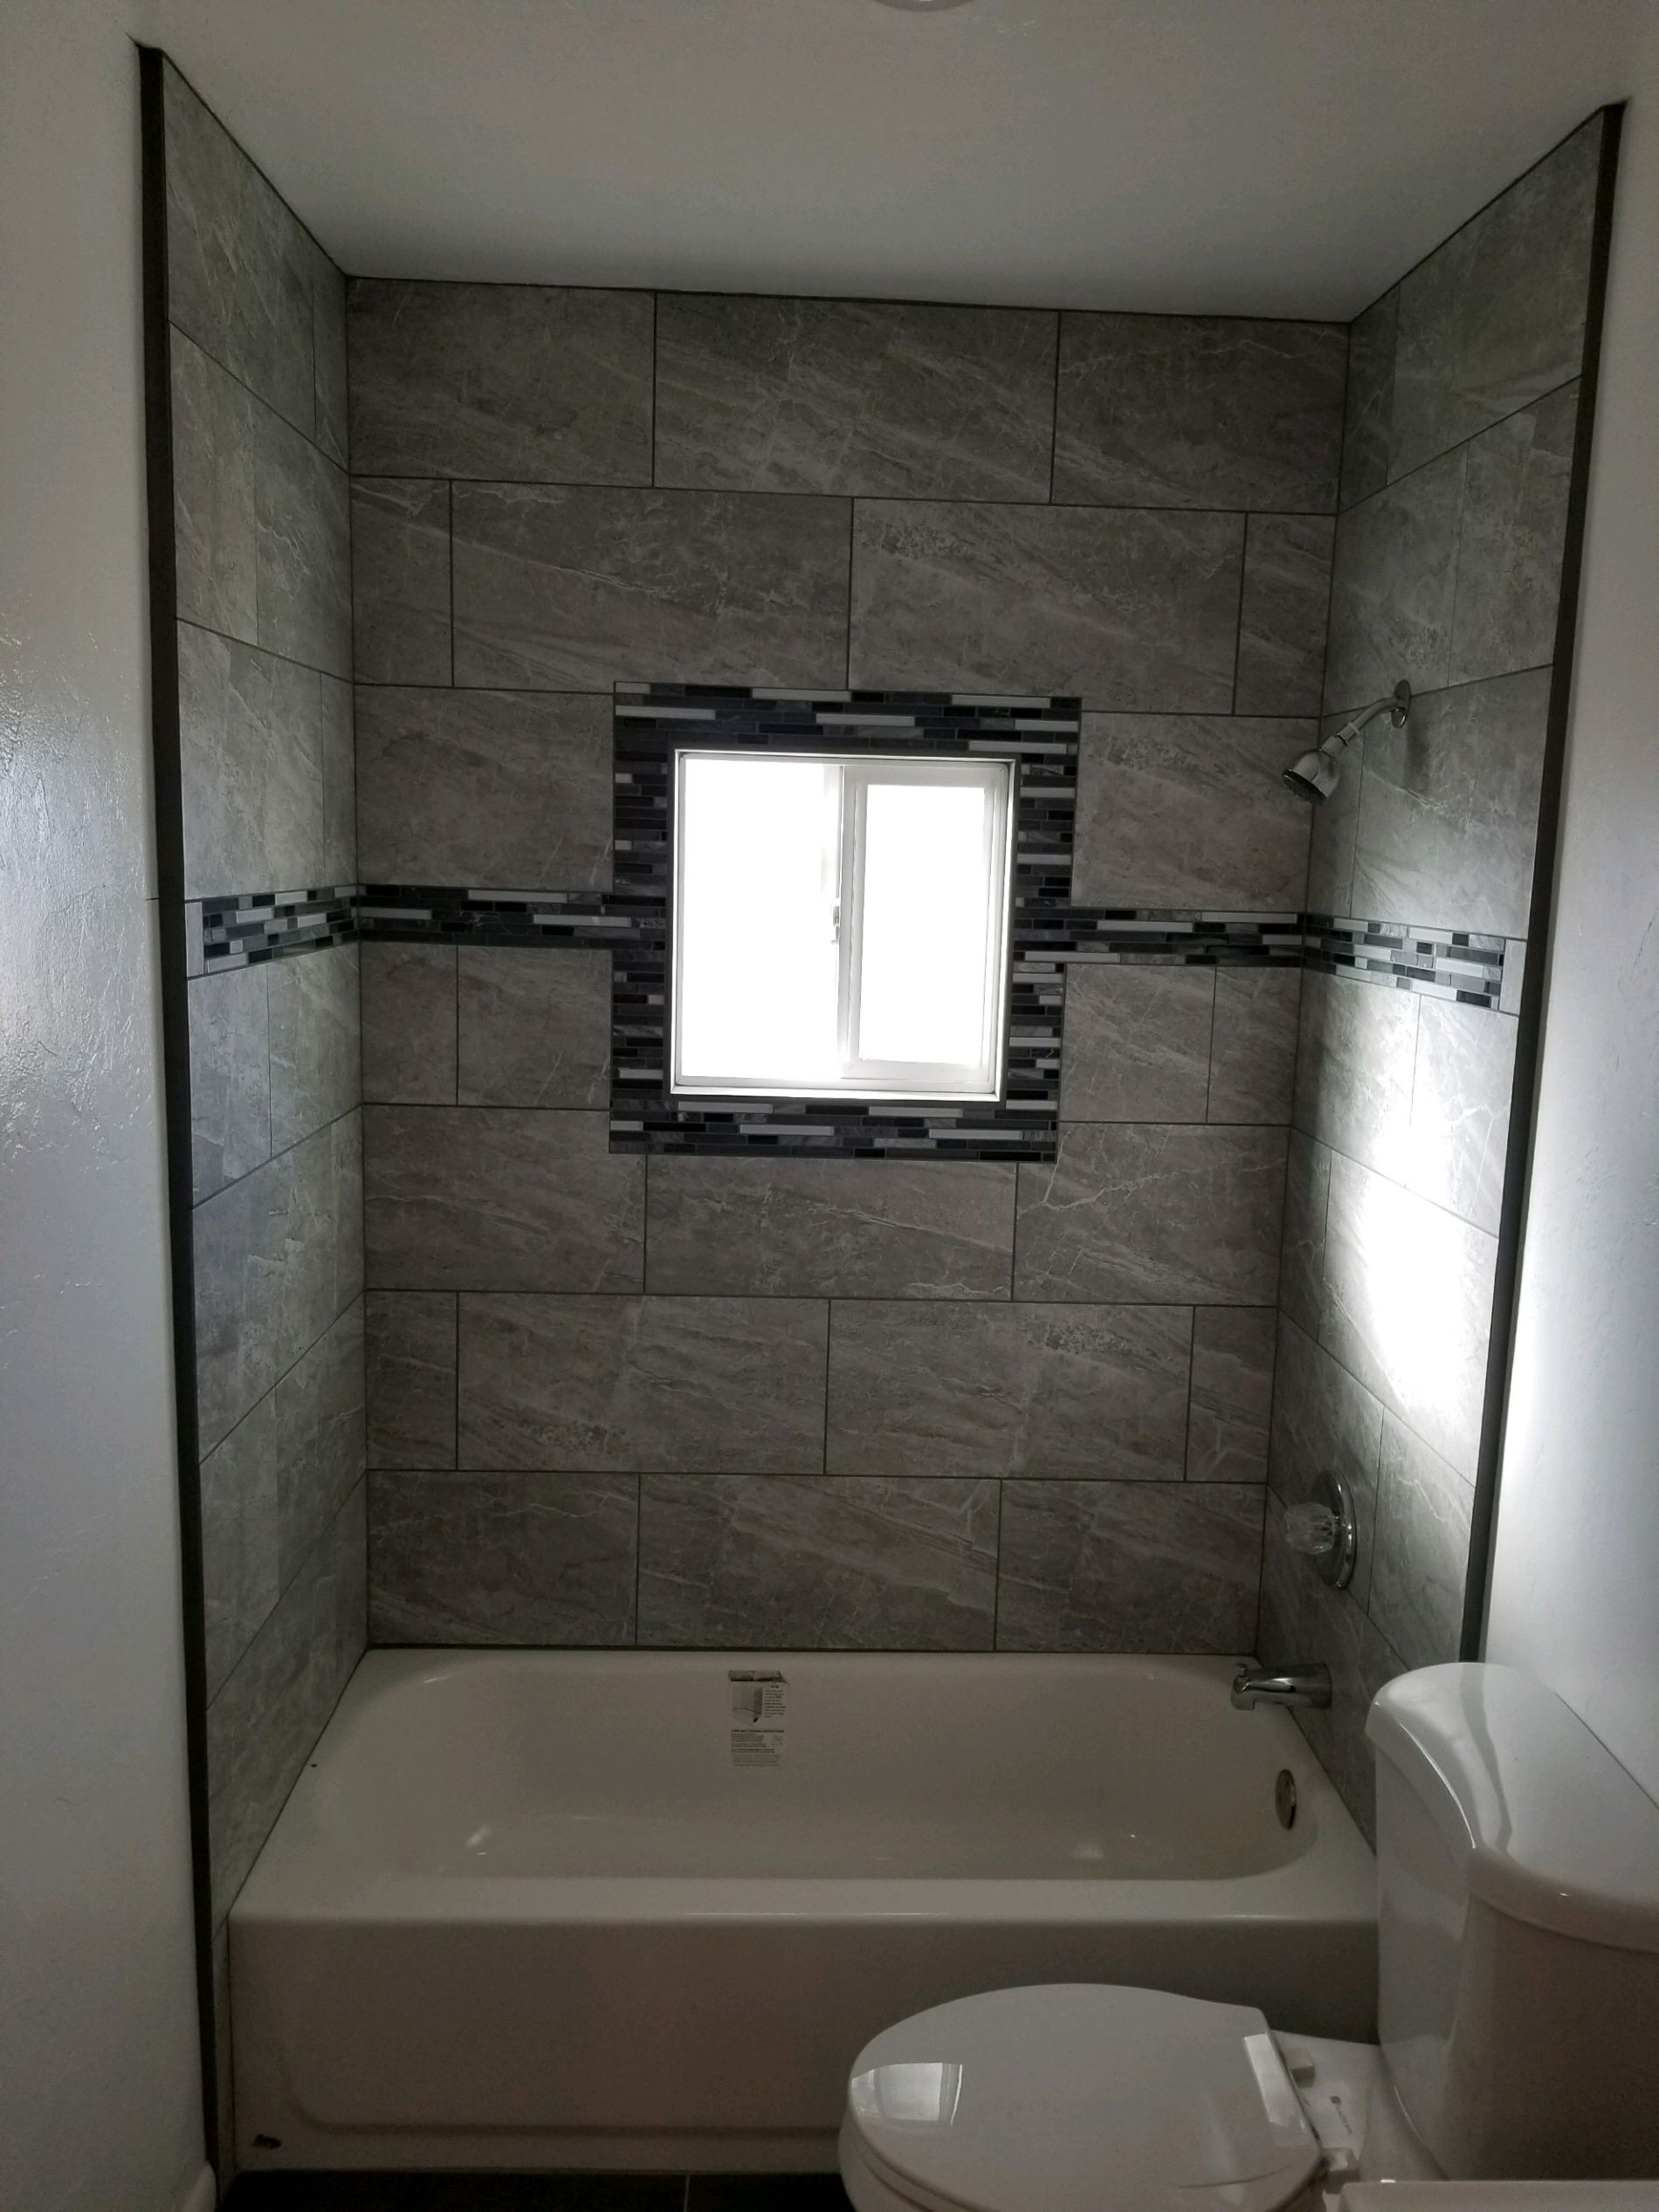 Bathroom shower with gray tiles